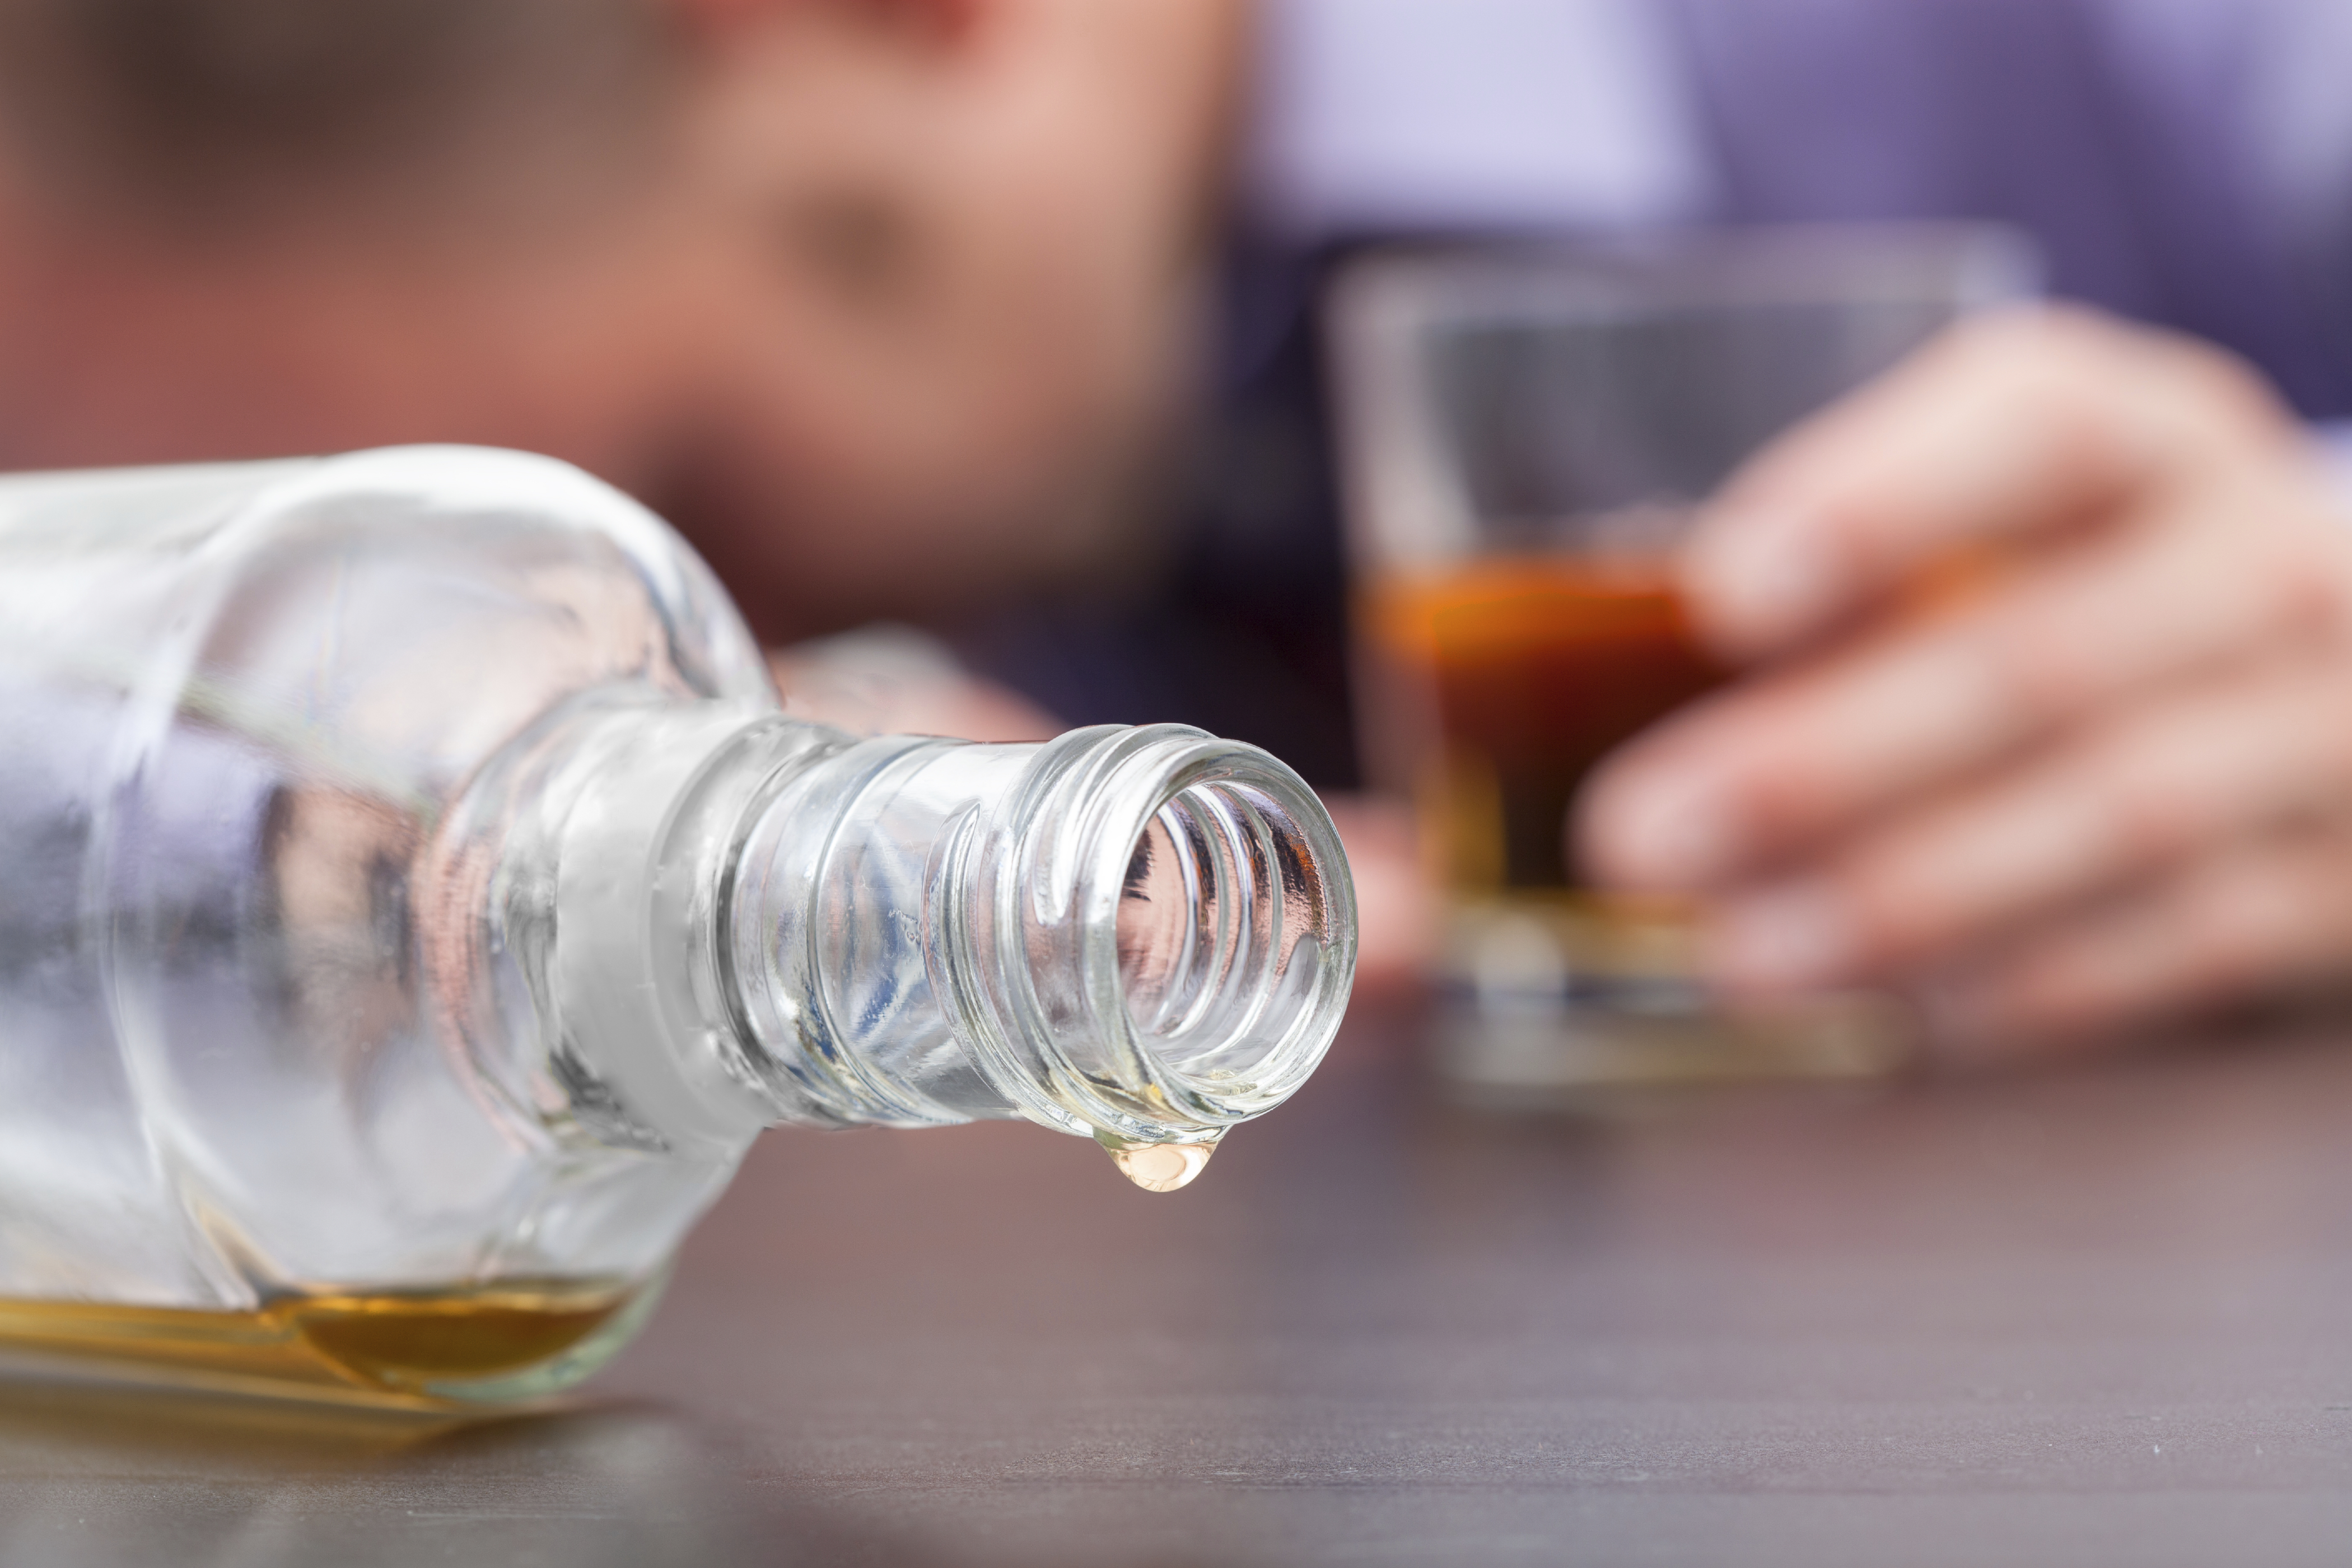 Most Common Victims Of Alcohol Poisoning Surprise Researchers Cbs News 